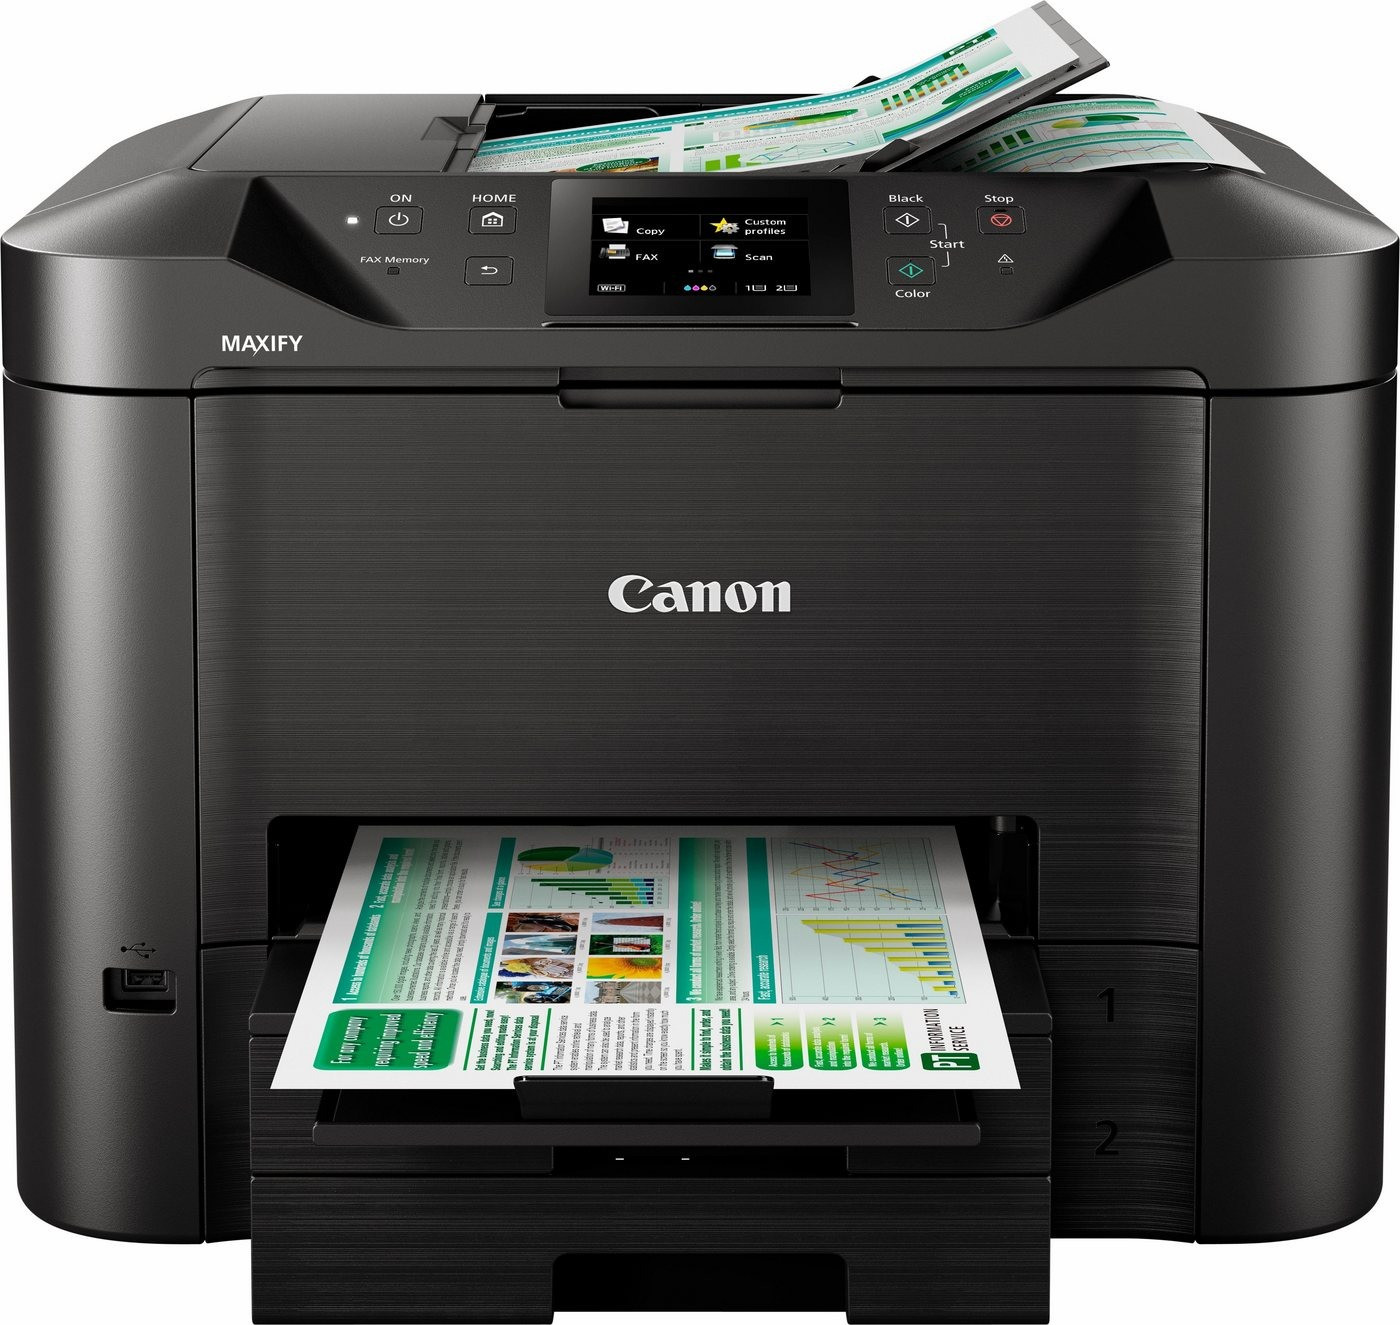 Buy Canon MAXIFY from on Best MB5450 (Today) £159.97 – Deals